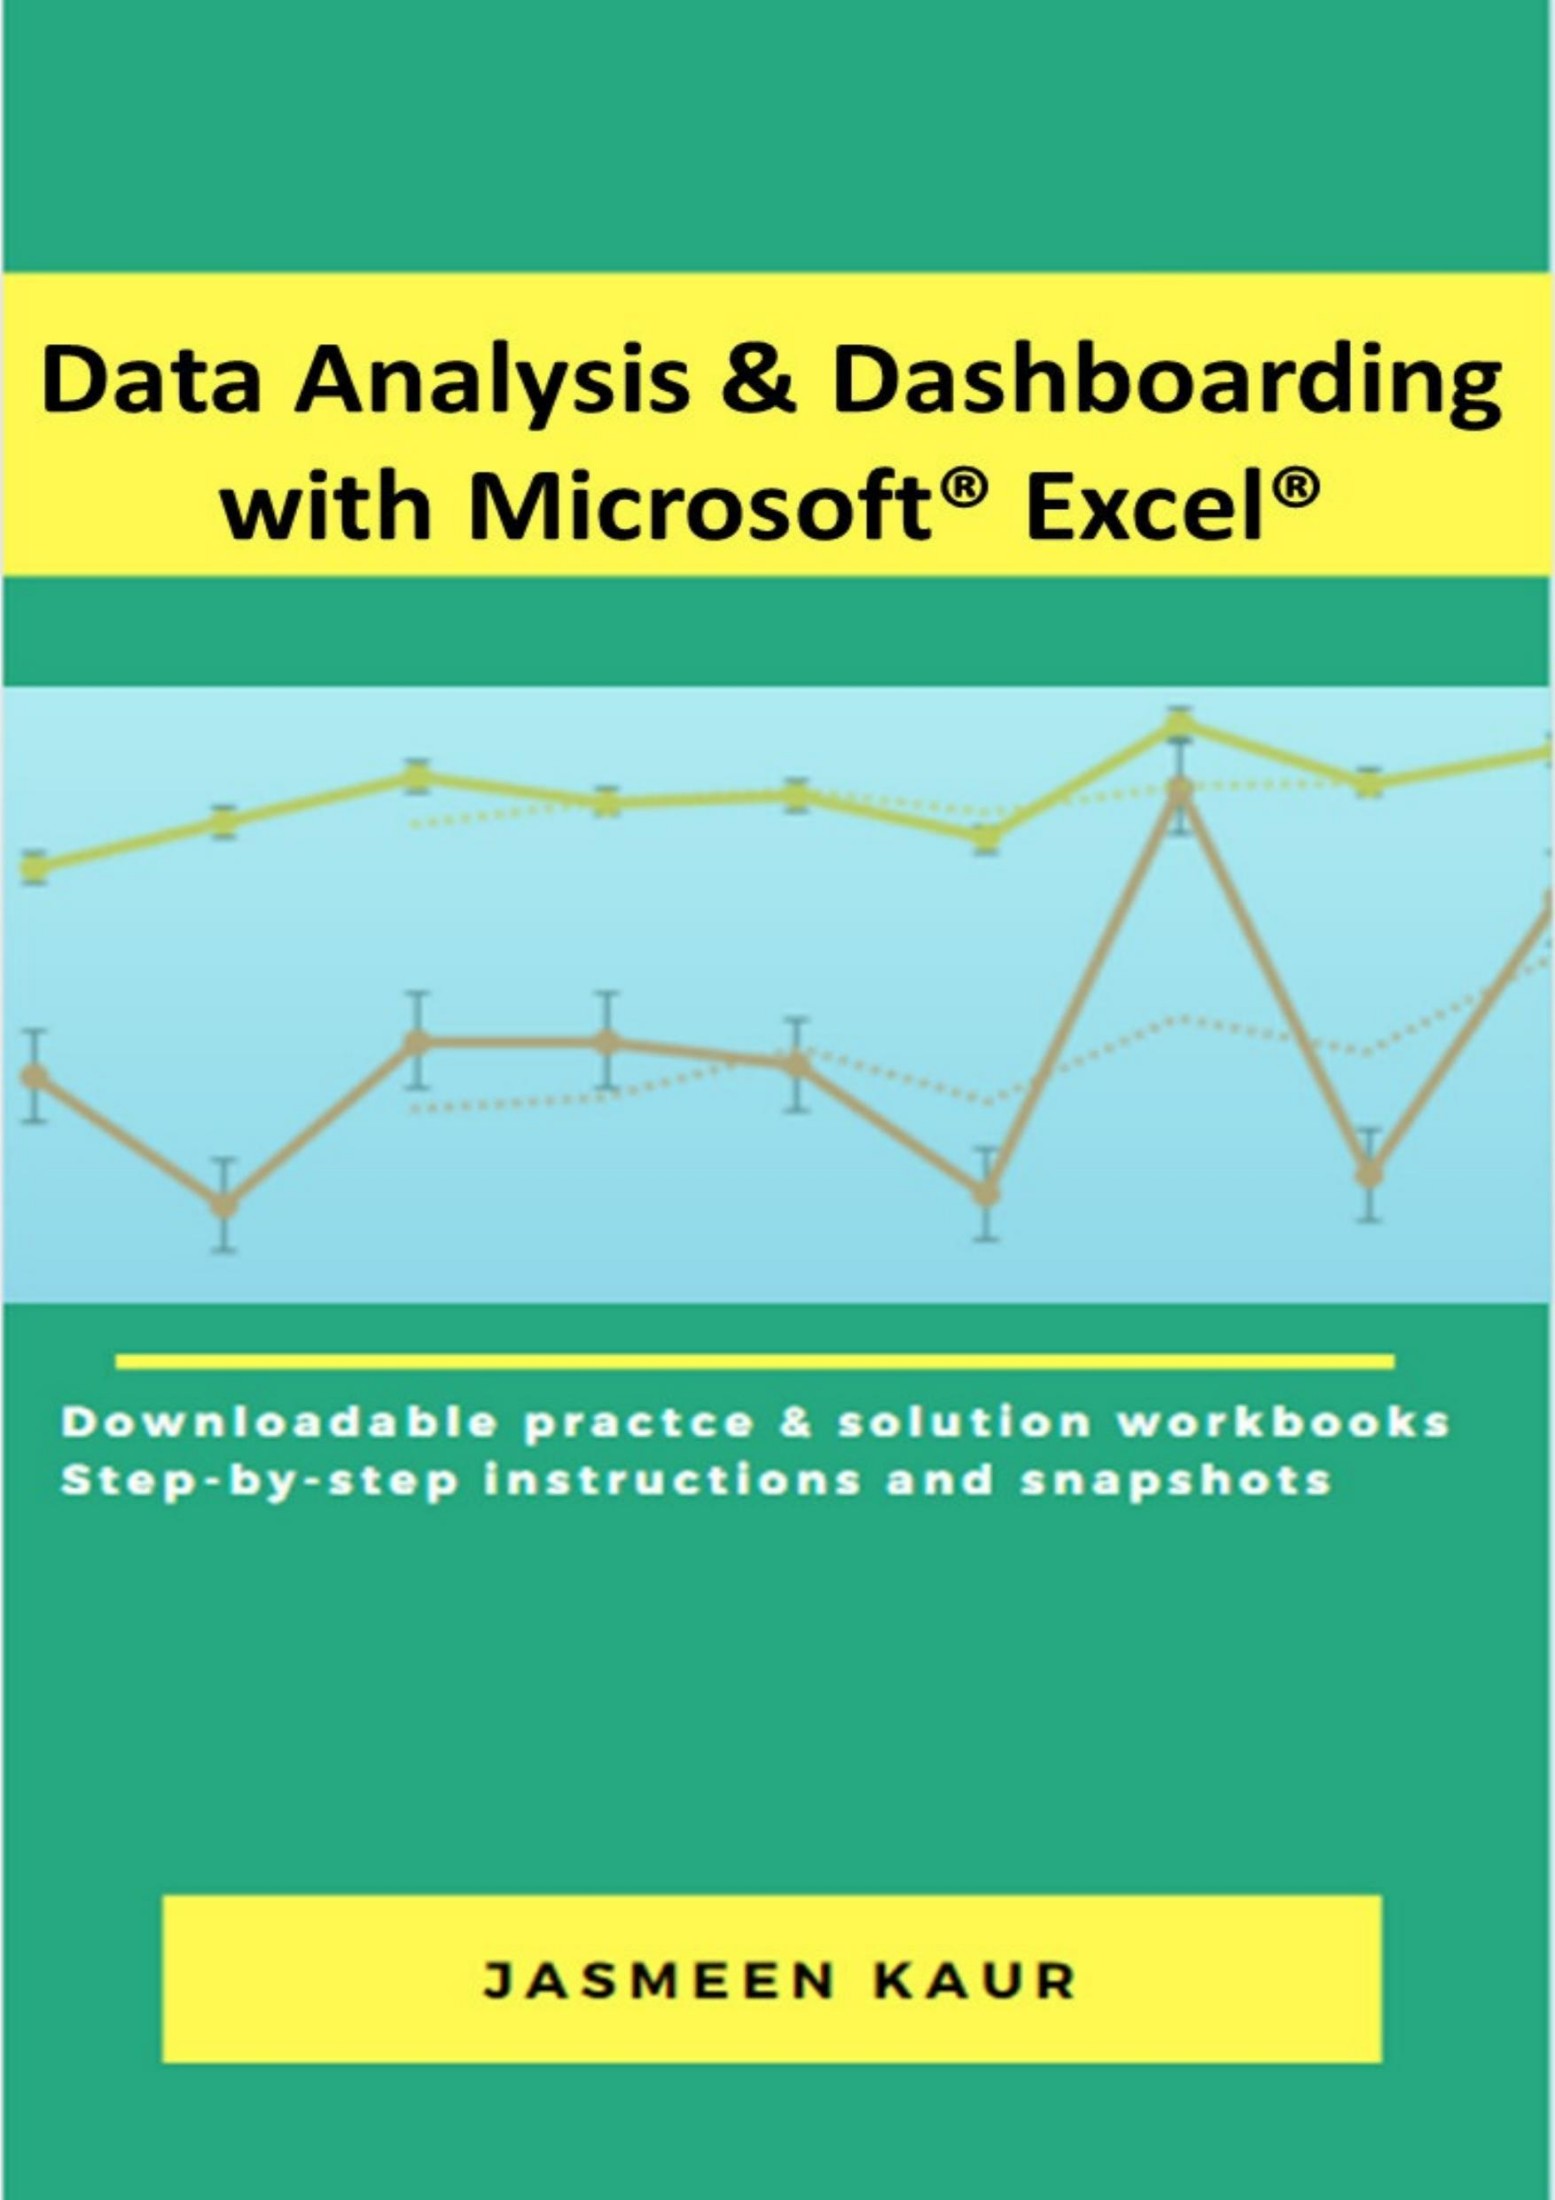 Data Analysis & Dashboarding with Microsoft Excel